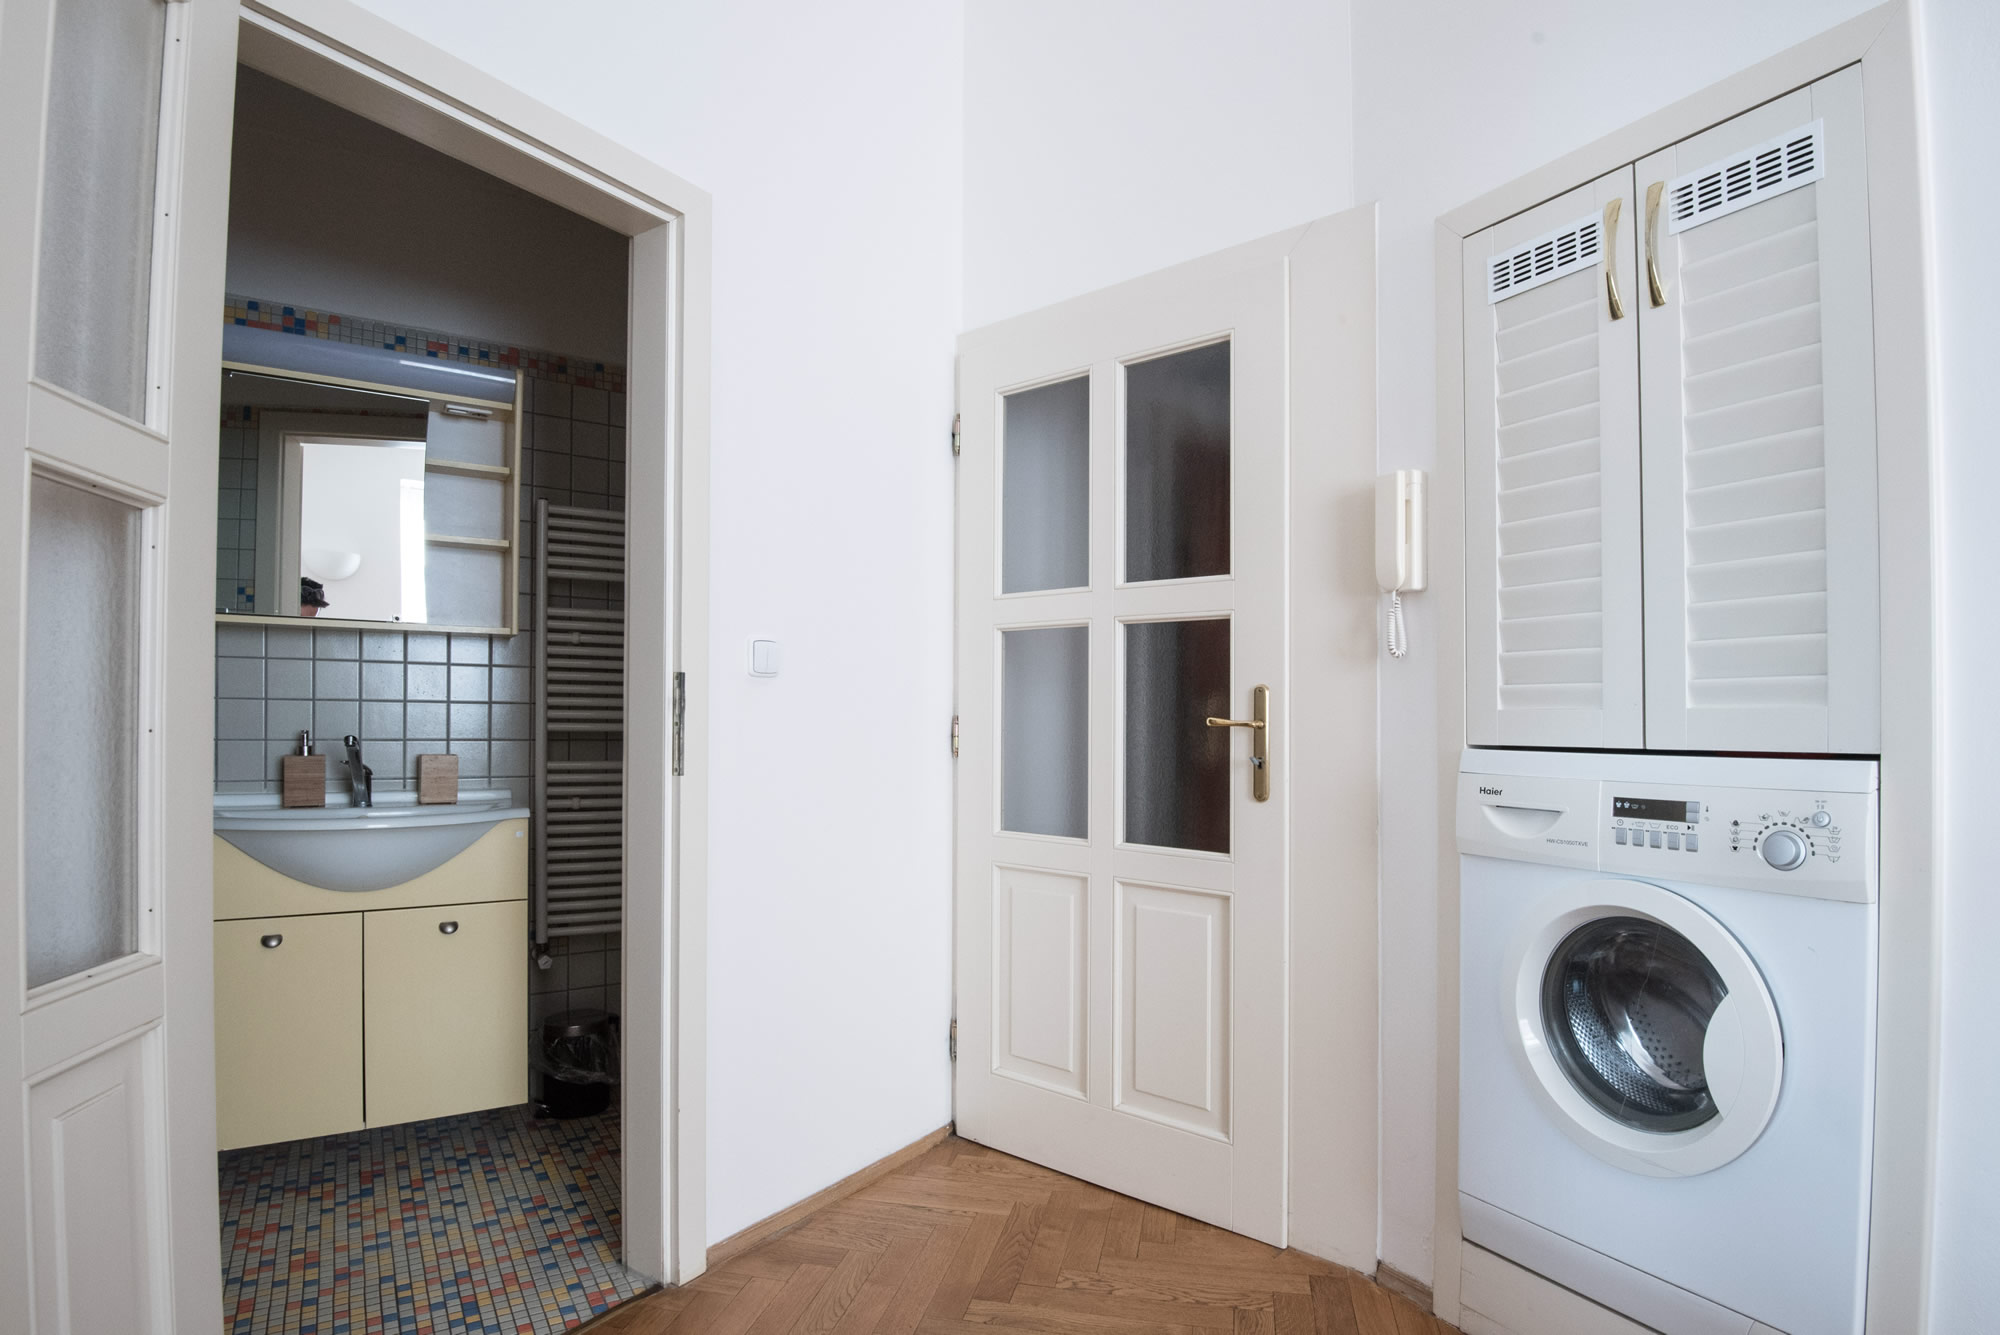 Apartment with a washing machine and bathroom.